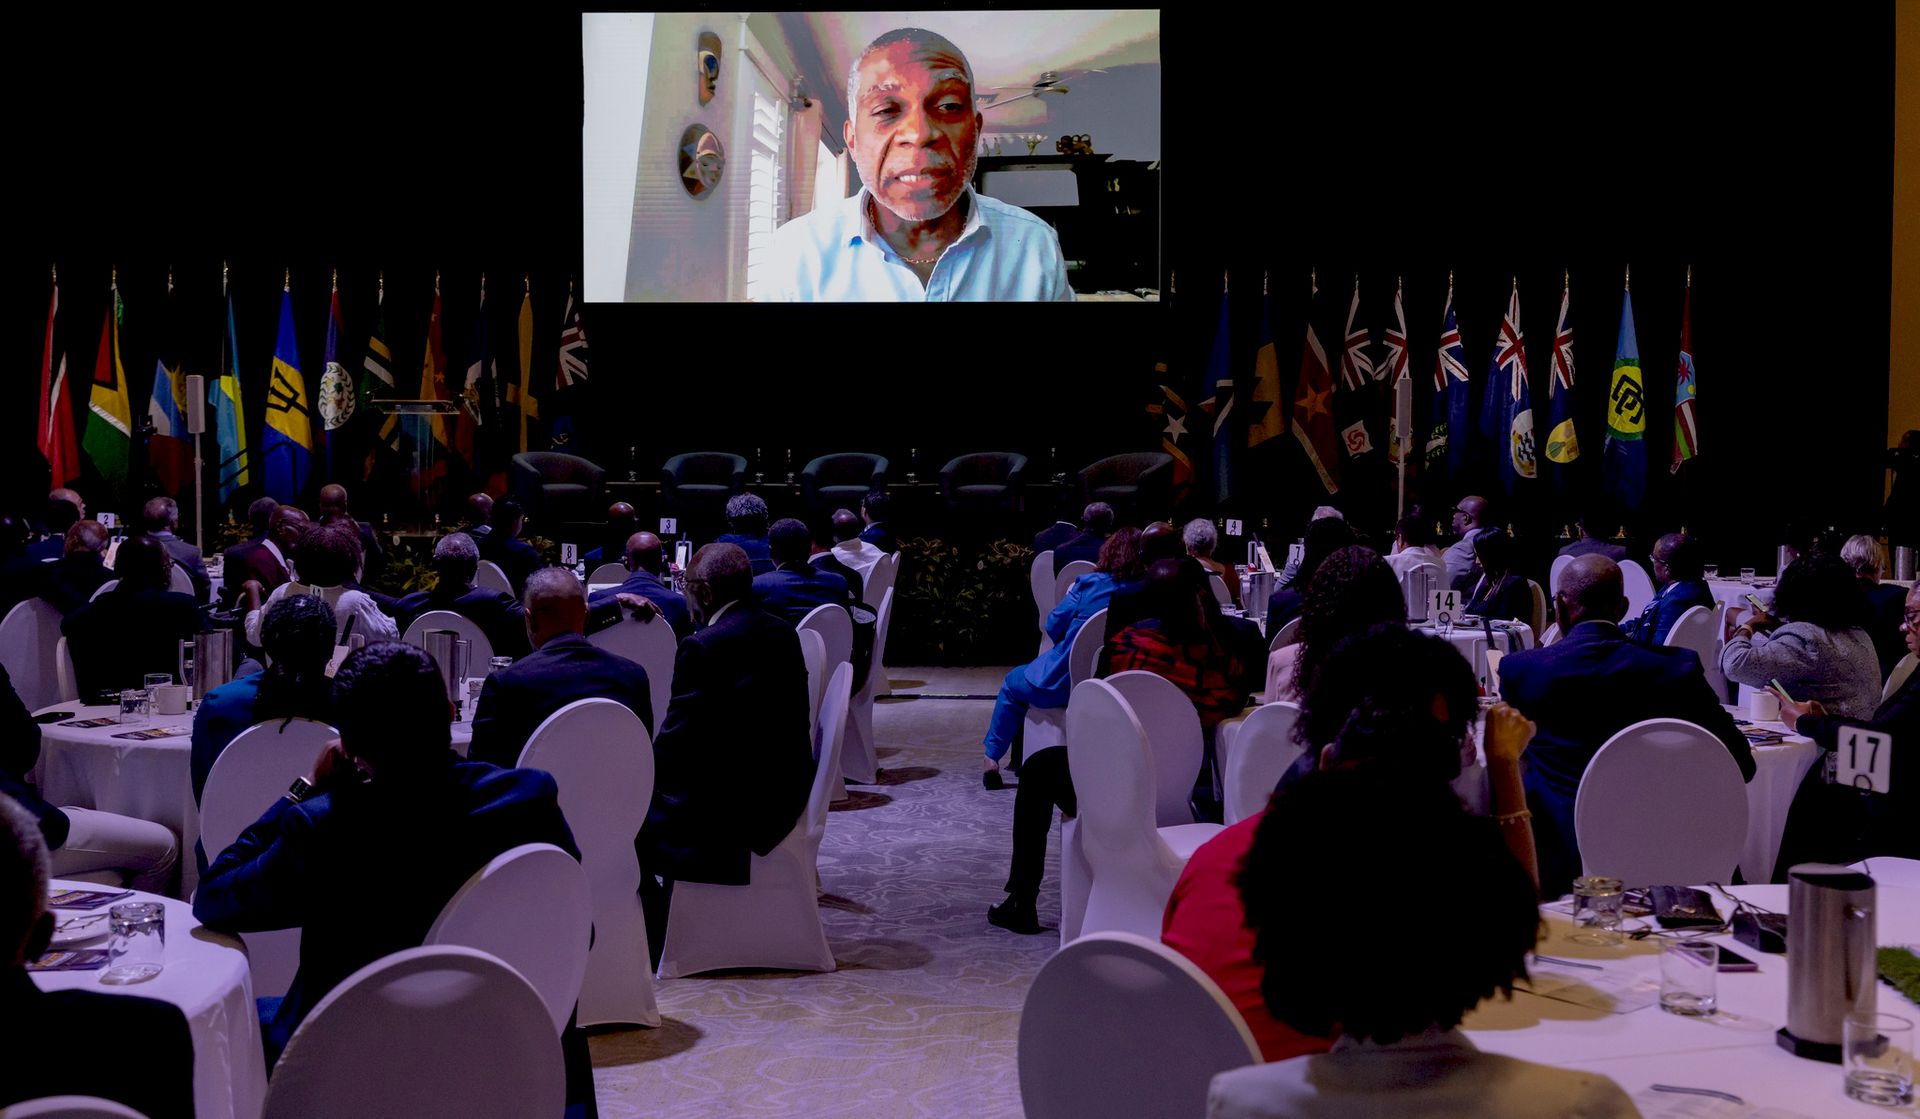 Former West Former West Indies fast bowler Michael Holding speaks via video call during the Caricom Regional Cricket Conference at the Hyatt Regency, Port-of-Spain, yesterday.  CARICOM CRICKET CONFERENCE (Image obtained at guardian.co.tt)Indies fast bowler Michael Holding speaks via video call during the Caricom Regional Cricket Conference at the Hyatt Regency, Port-of-Spain, yesterday.  CARICOM CRICKET CONFERENCE (Image obtained at newsday.co.tt)